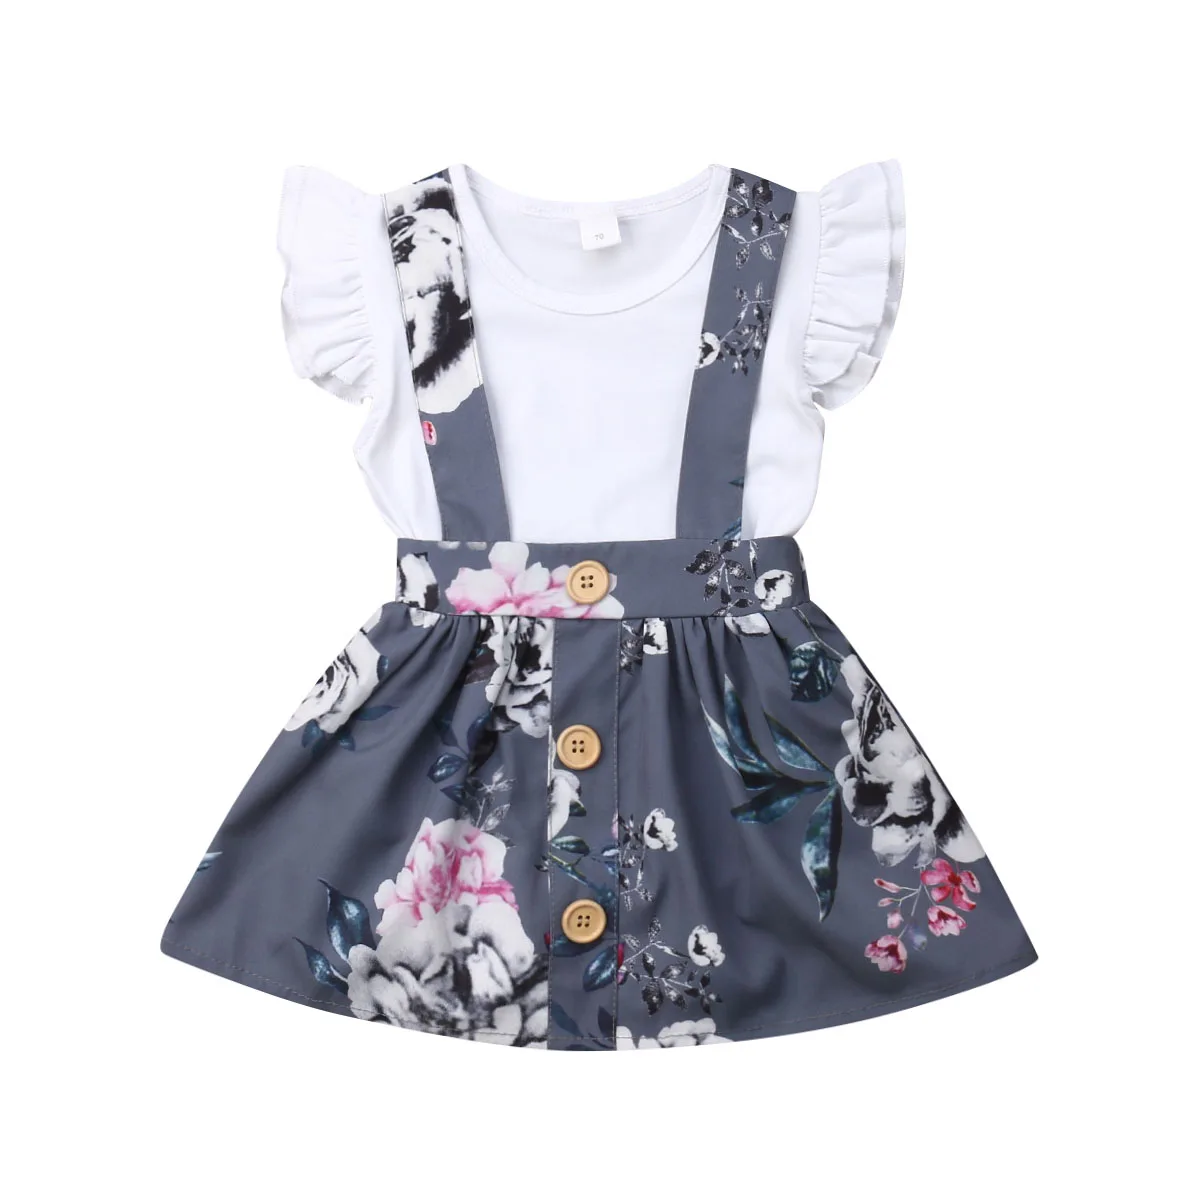 

Baby Girls Clothes Set White Ruffled Bodysuit Romper Floral Suspender Skirt 0-24M Newborn Infant Toddler Casual Outfits 2021 New